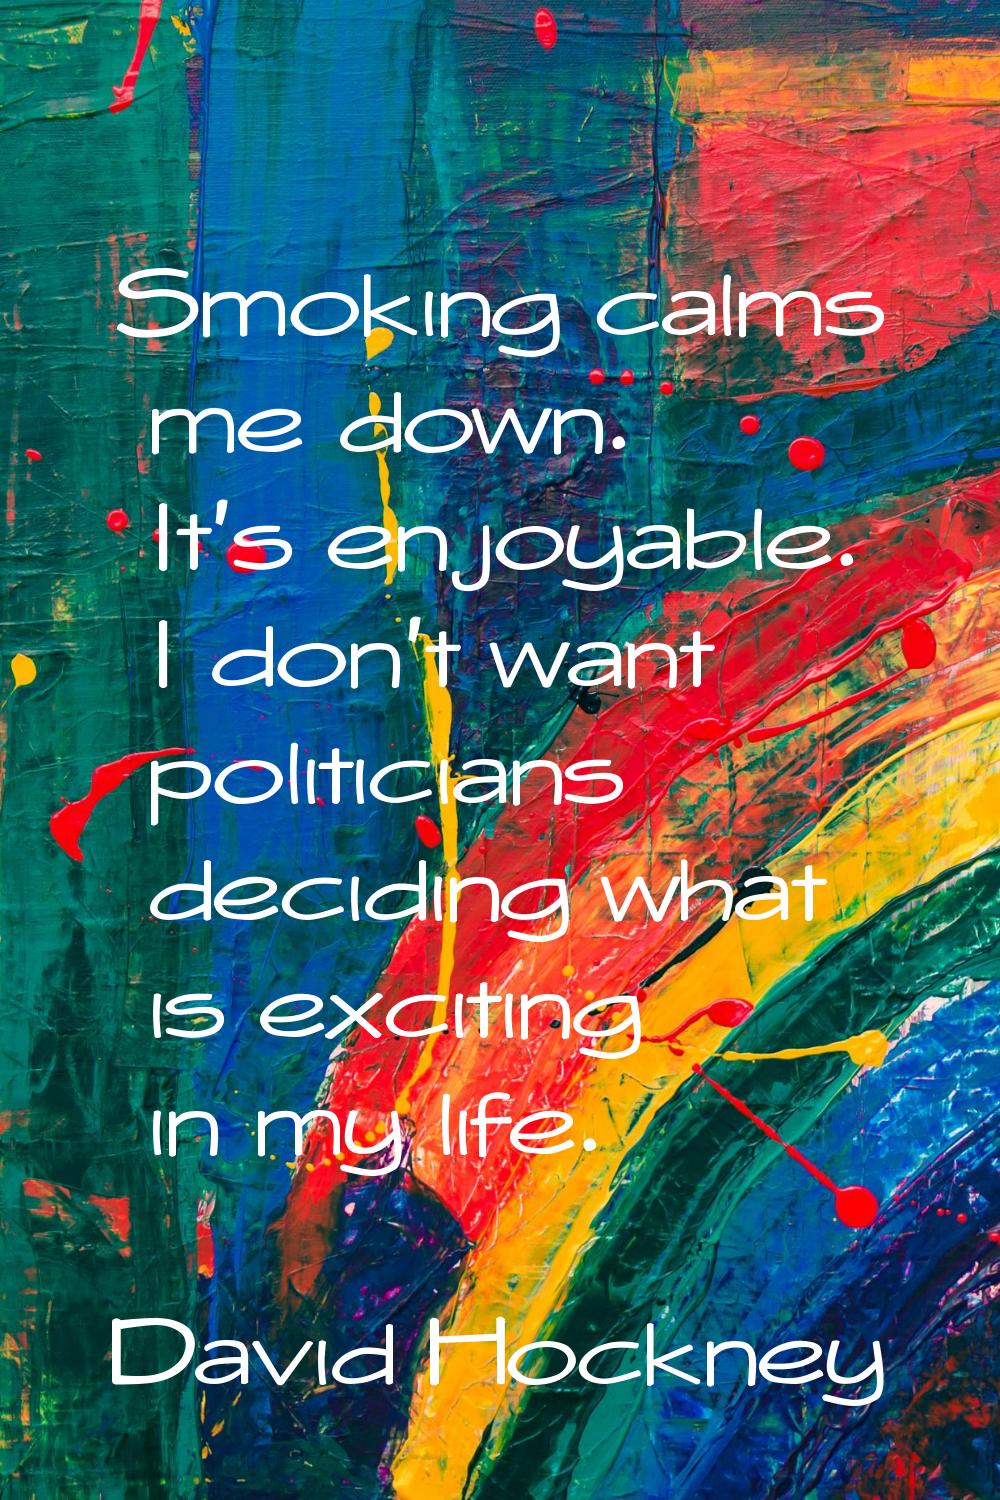 Smoking calms me down. It's enjoyable. I don't want politicians deciding what is exciting in my lif